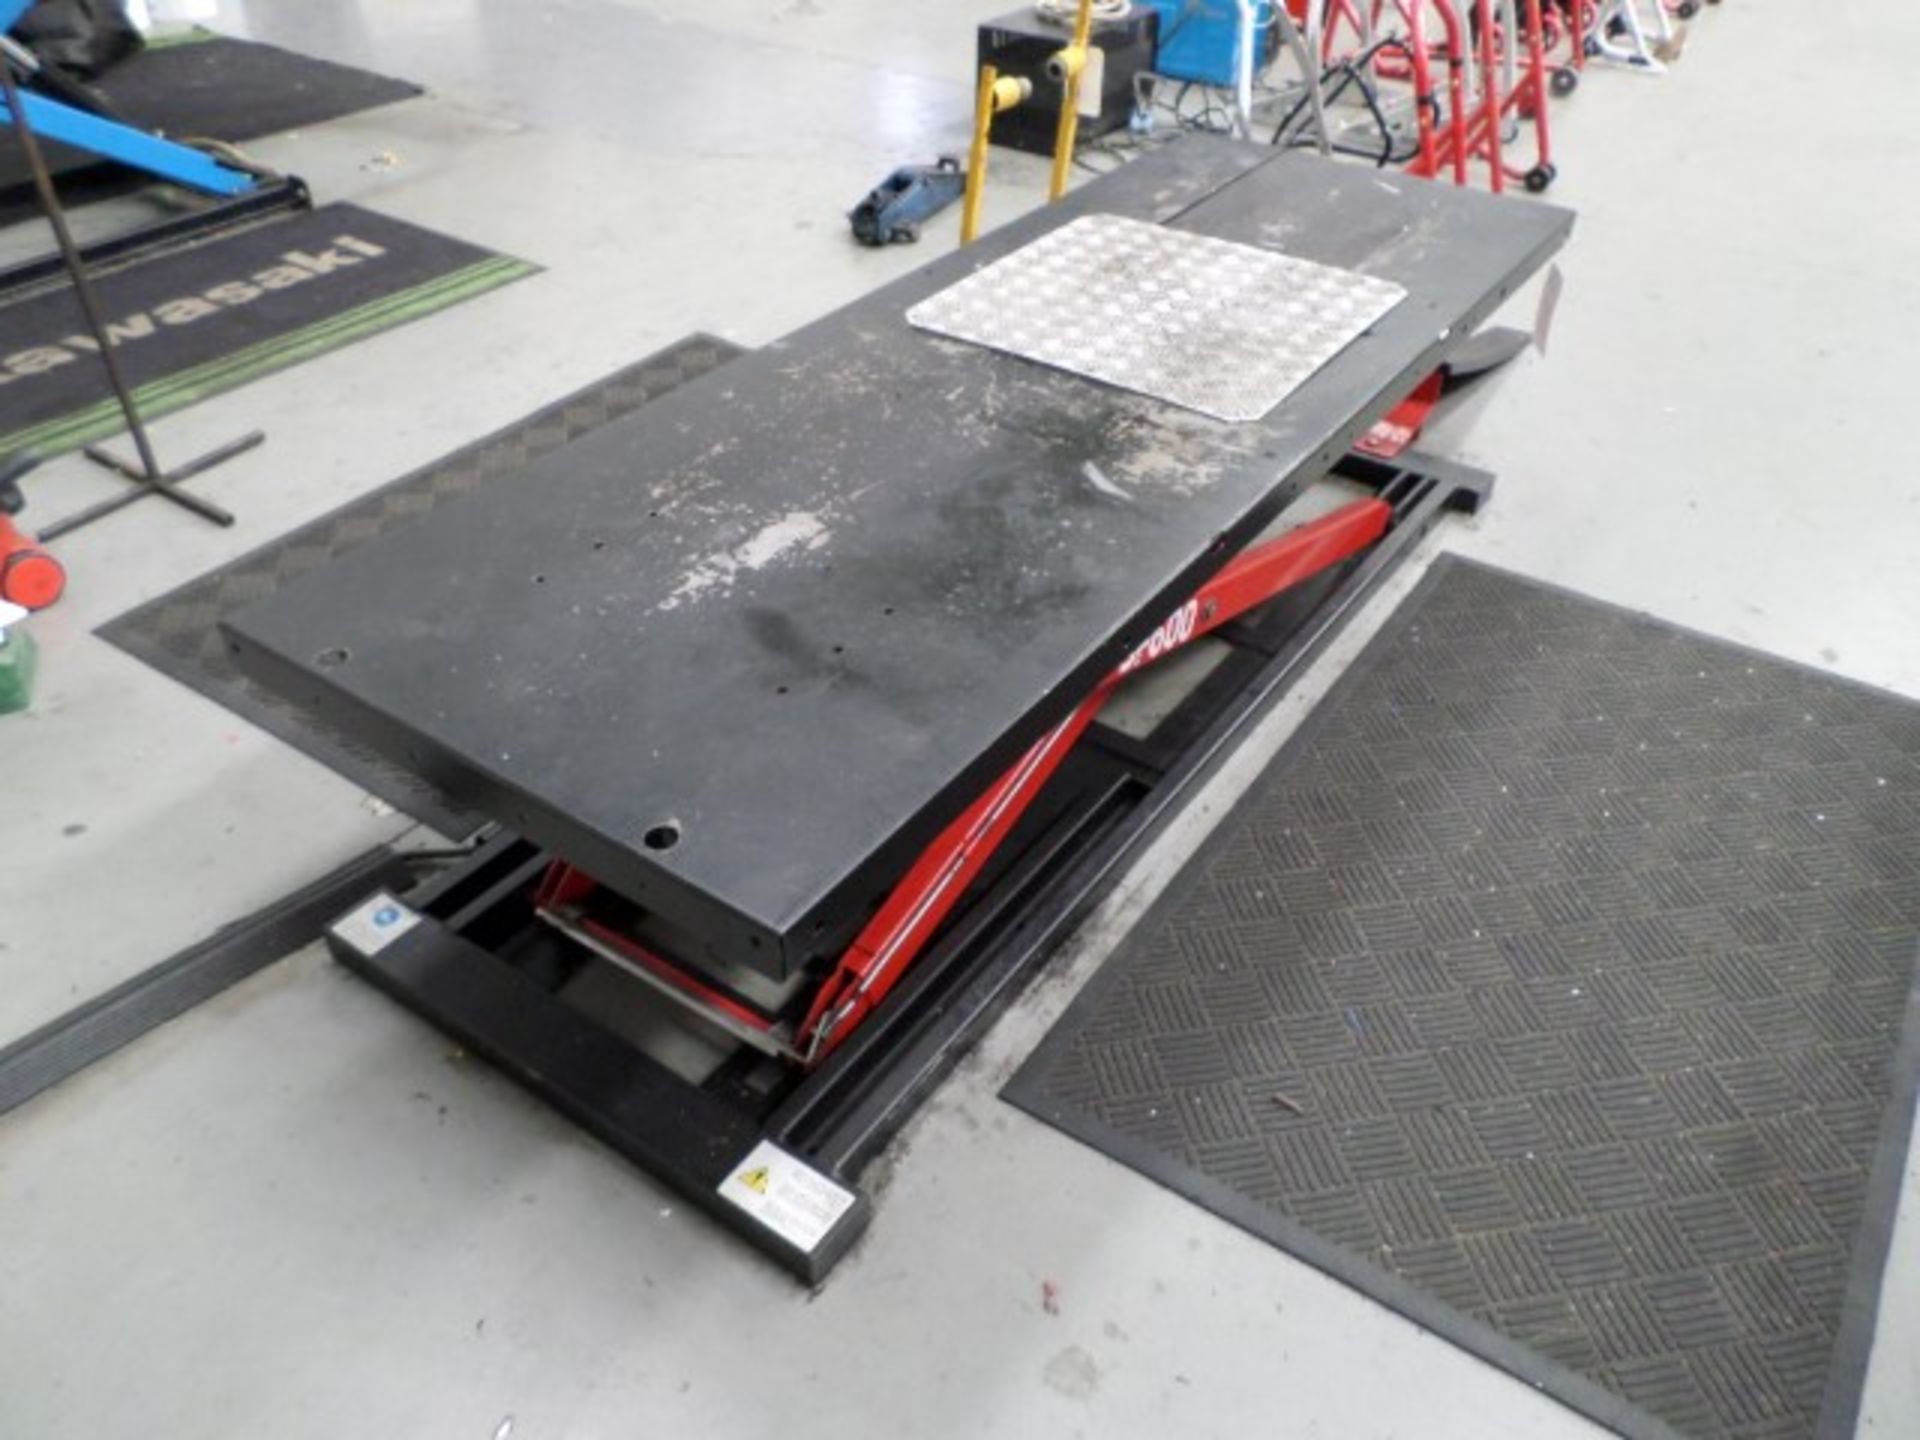 Motomocles SF600 600Kg electric/ hydraulic motorcycle work bench, Serial no. 4577 (2010) (Please - Image 2 of 4